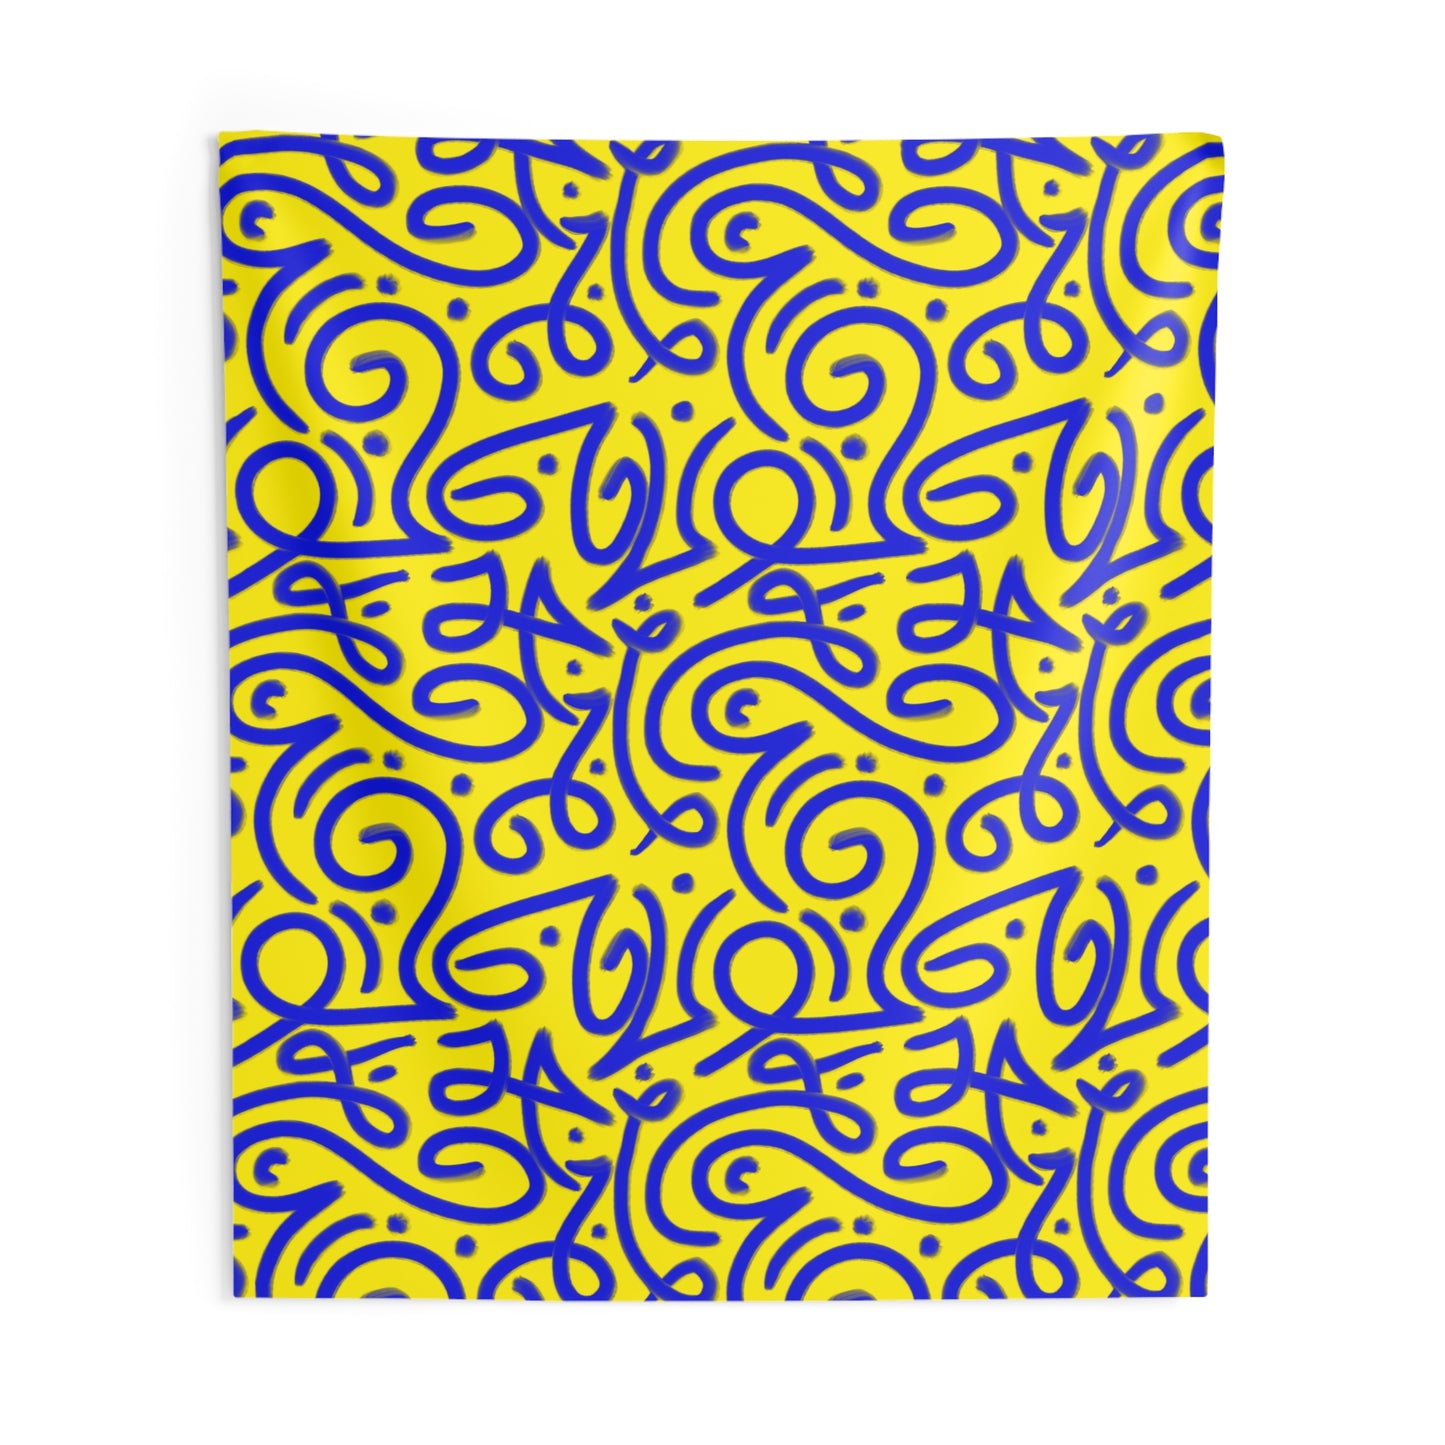 Fun Playful Light Language Script on Indoor Wall Tapestry - Yellow and Blue